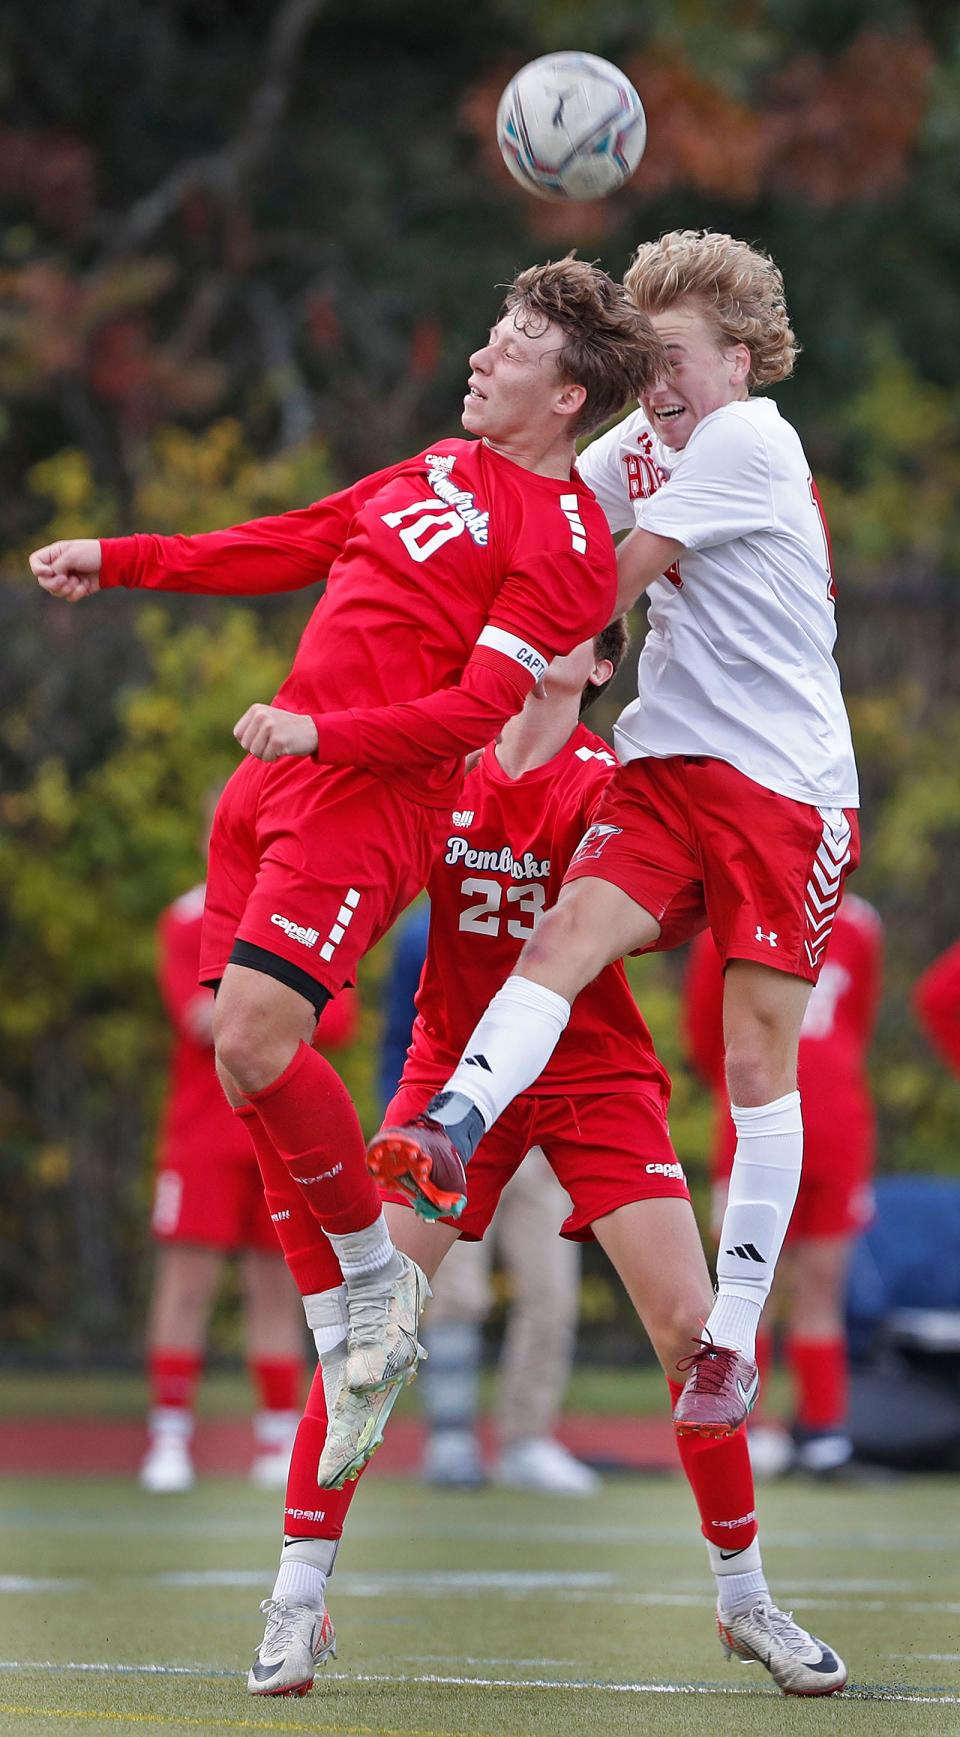 Double header Pembroke and Hingham #10's Quinn Reilly and Brayden Lawler leap to head the ball at mid field.

Pembroke hosted Hingham boys soccer on Tuesday, Oct. 10, 2023